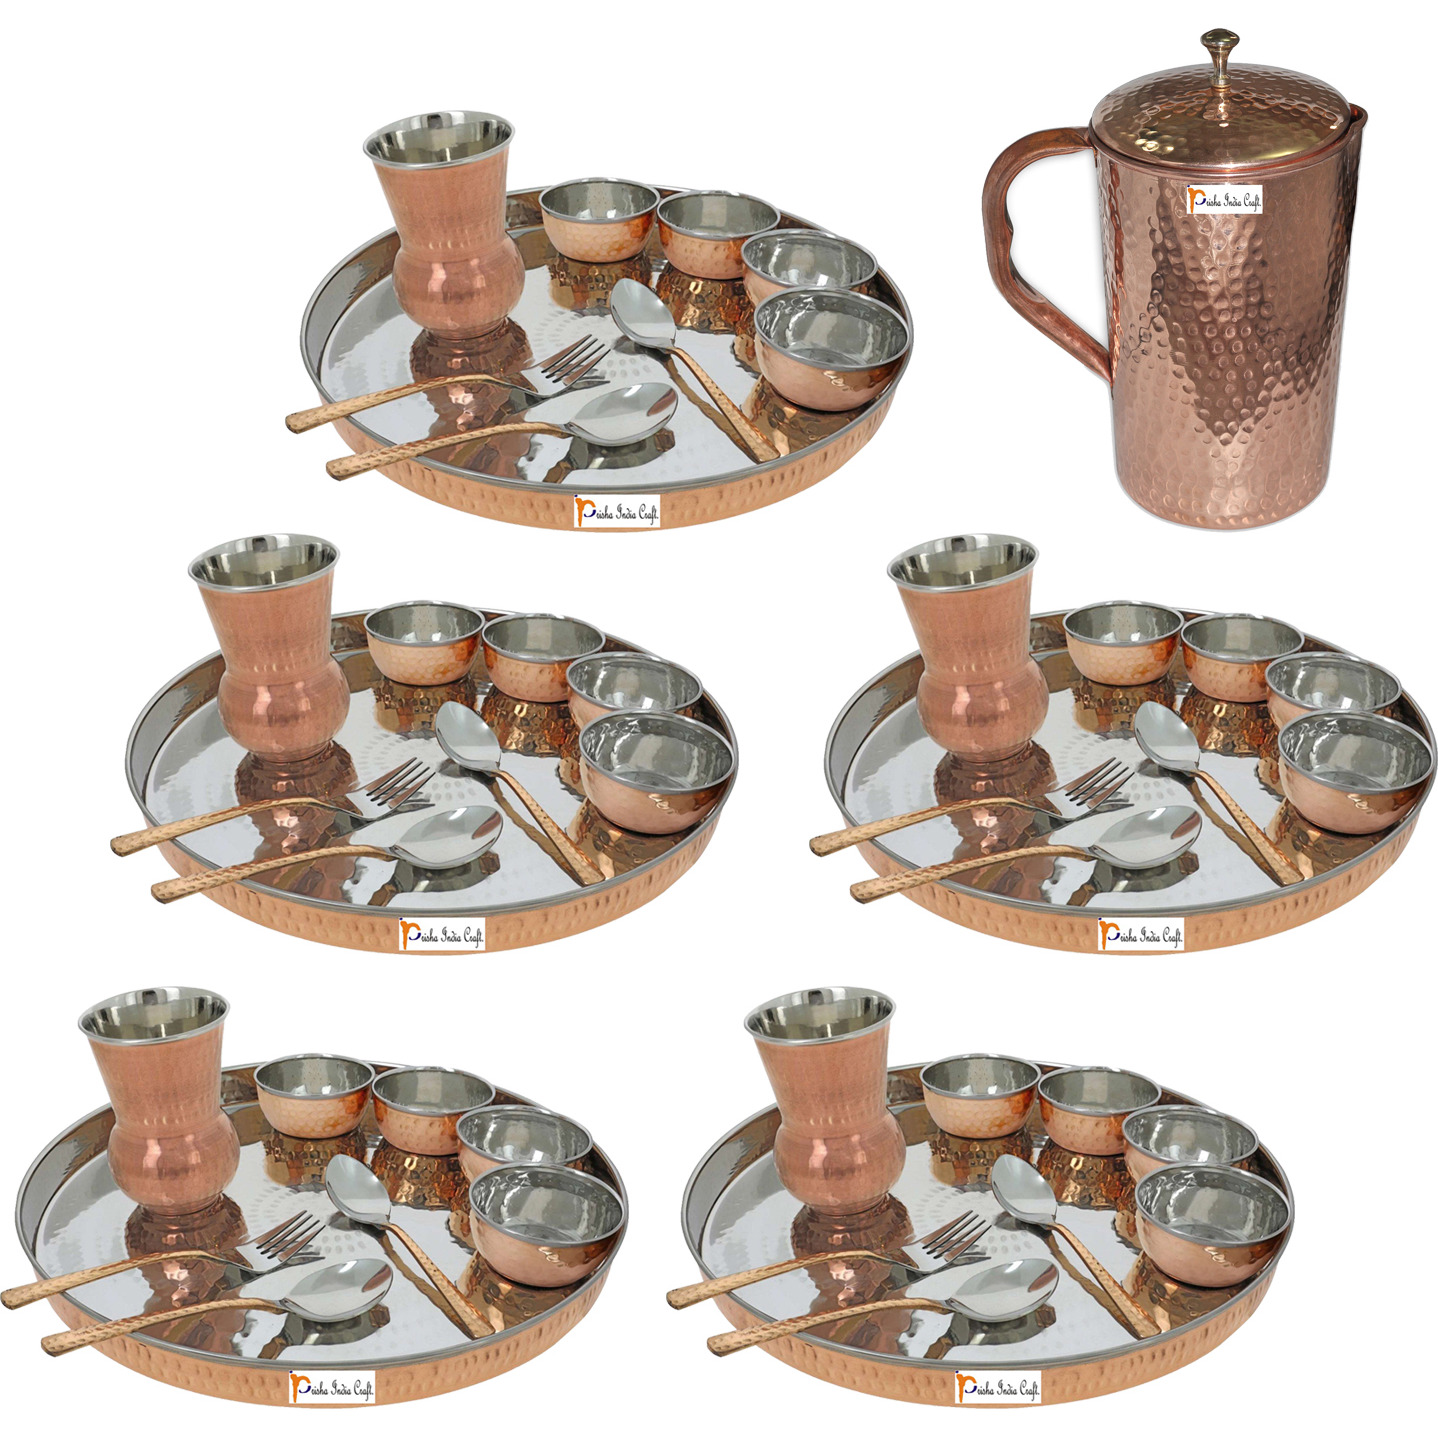 Prisha India Craft B. Set of 5 Dinnerware Traditional Stainless Steel Copper Dinner Set of Thali Plate, Bowls, Glass and Spoons, Dia 13  With 1 Pure Copper Hammered Pitcher Jug - Christmas Gift